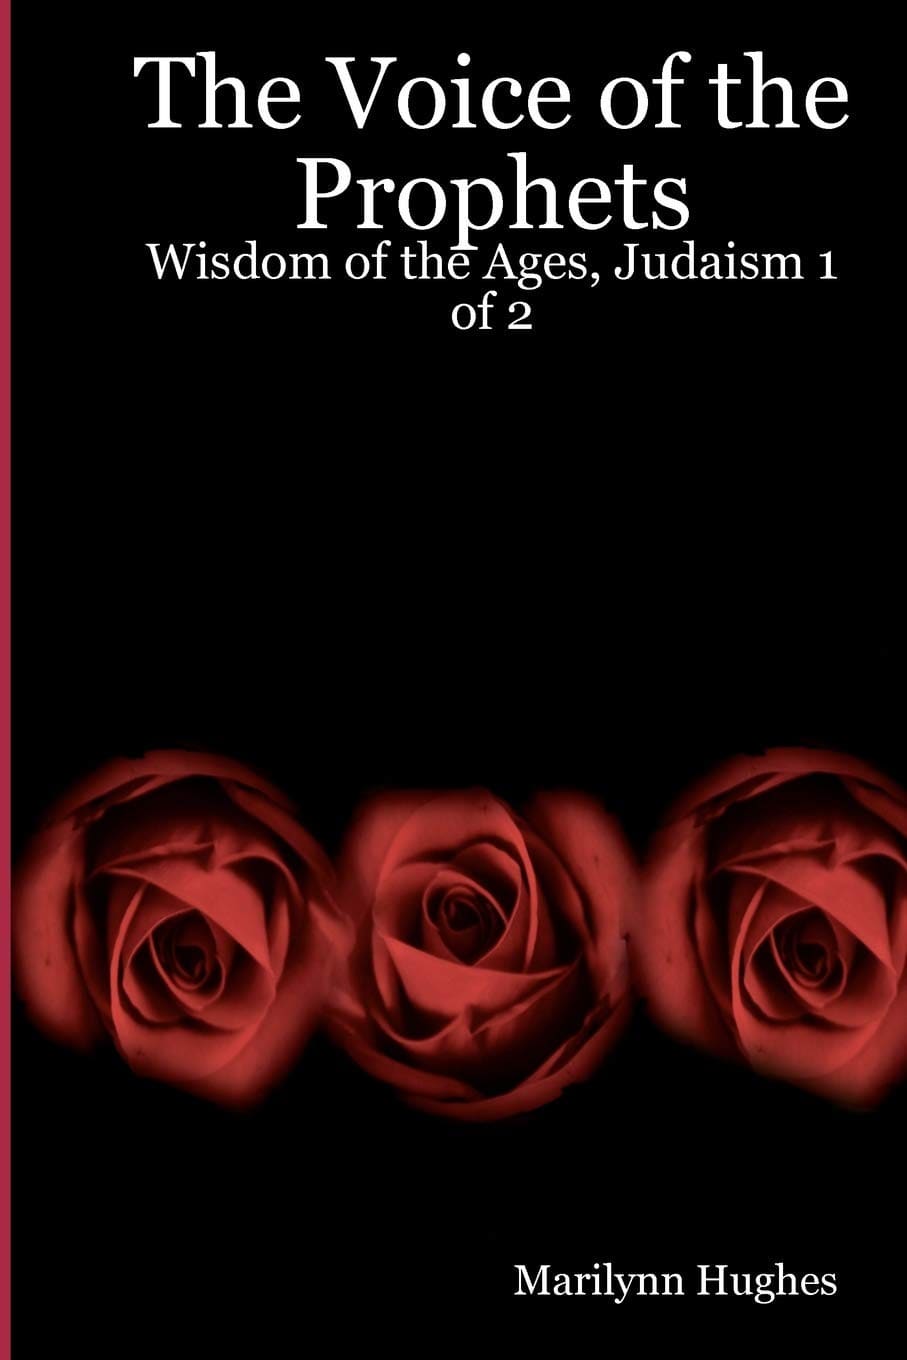 Wisdom of the Ages, Judaism 1 of 2, By Marilynn Hughes - An Encyclopedia of Ancient Sacred Texts in Twelve Volumes - An Out-of-Body Travel Book